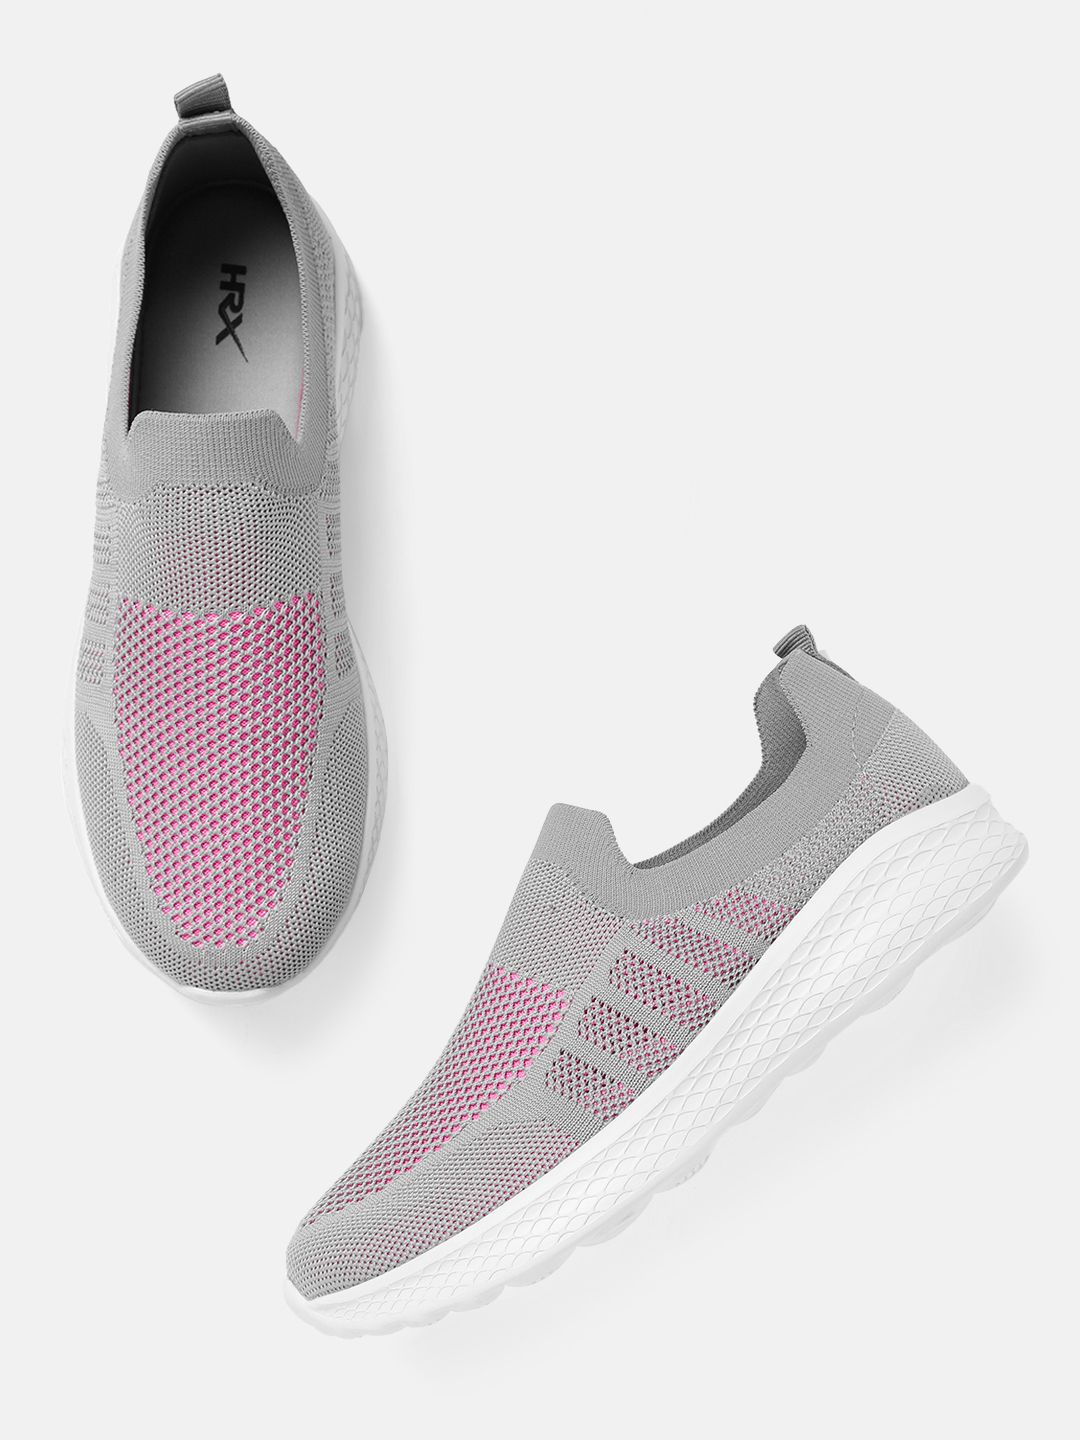 HRX by Hrithik Roshan Women Grey & Pink Woven Design Soft Walk Series 2.0 Socks Shoes Price in India